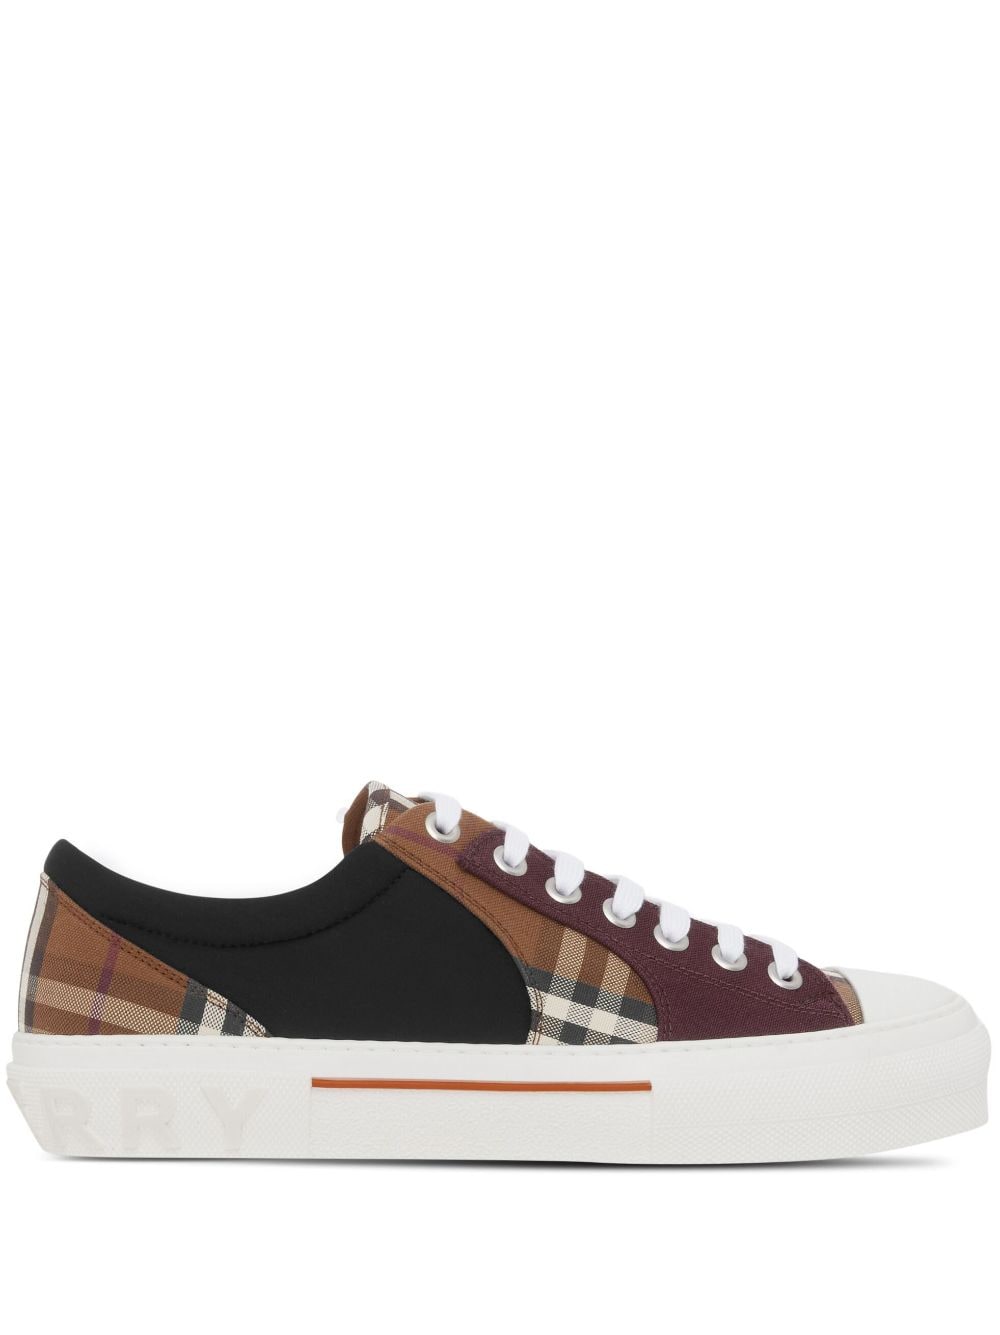 Burberry Vintage Check patchwork sneakers - Brown von Burberry